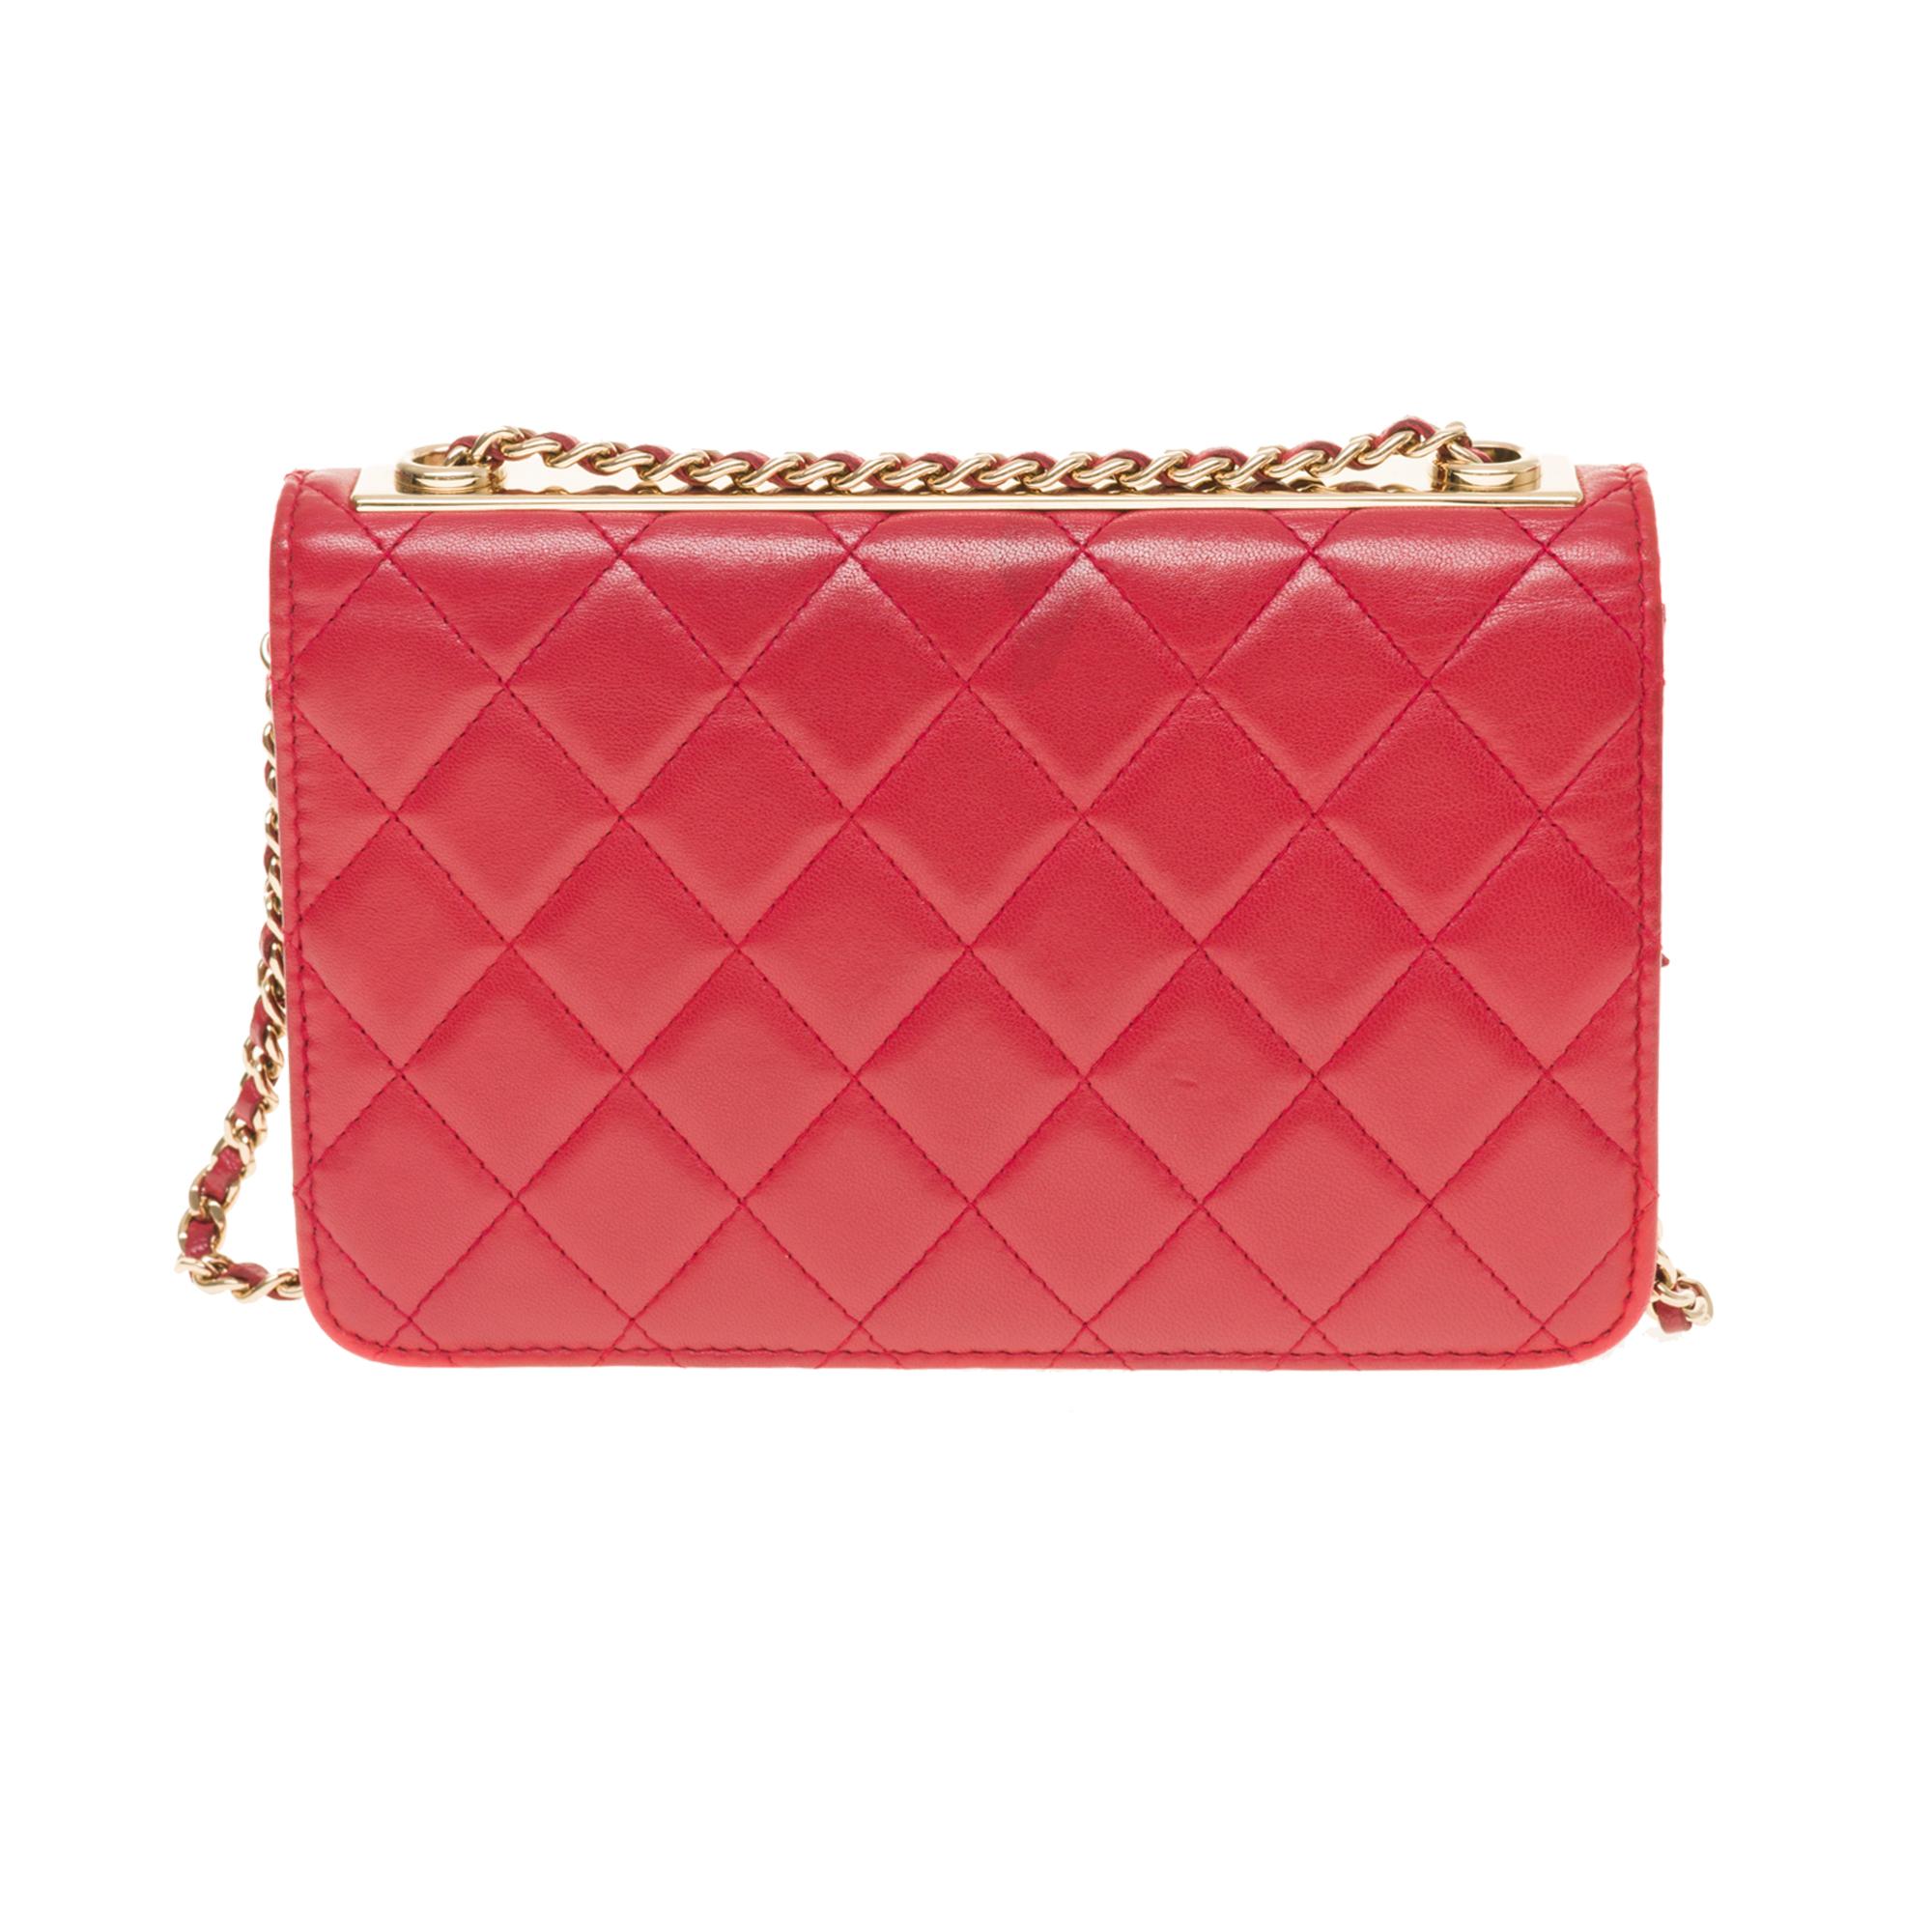 Sublime Chanel Trendy CC Wallet On Chain handbag in red quilted leather, gold-tone metal hardware, a gold-tone metal chain handle interlaced with red leather for a shoulder or shoulder strap 
 
Flap closure, gold-tone CC clasp
Zip on the inside flap